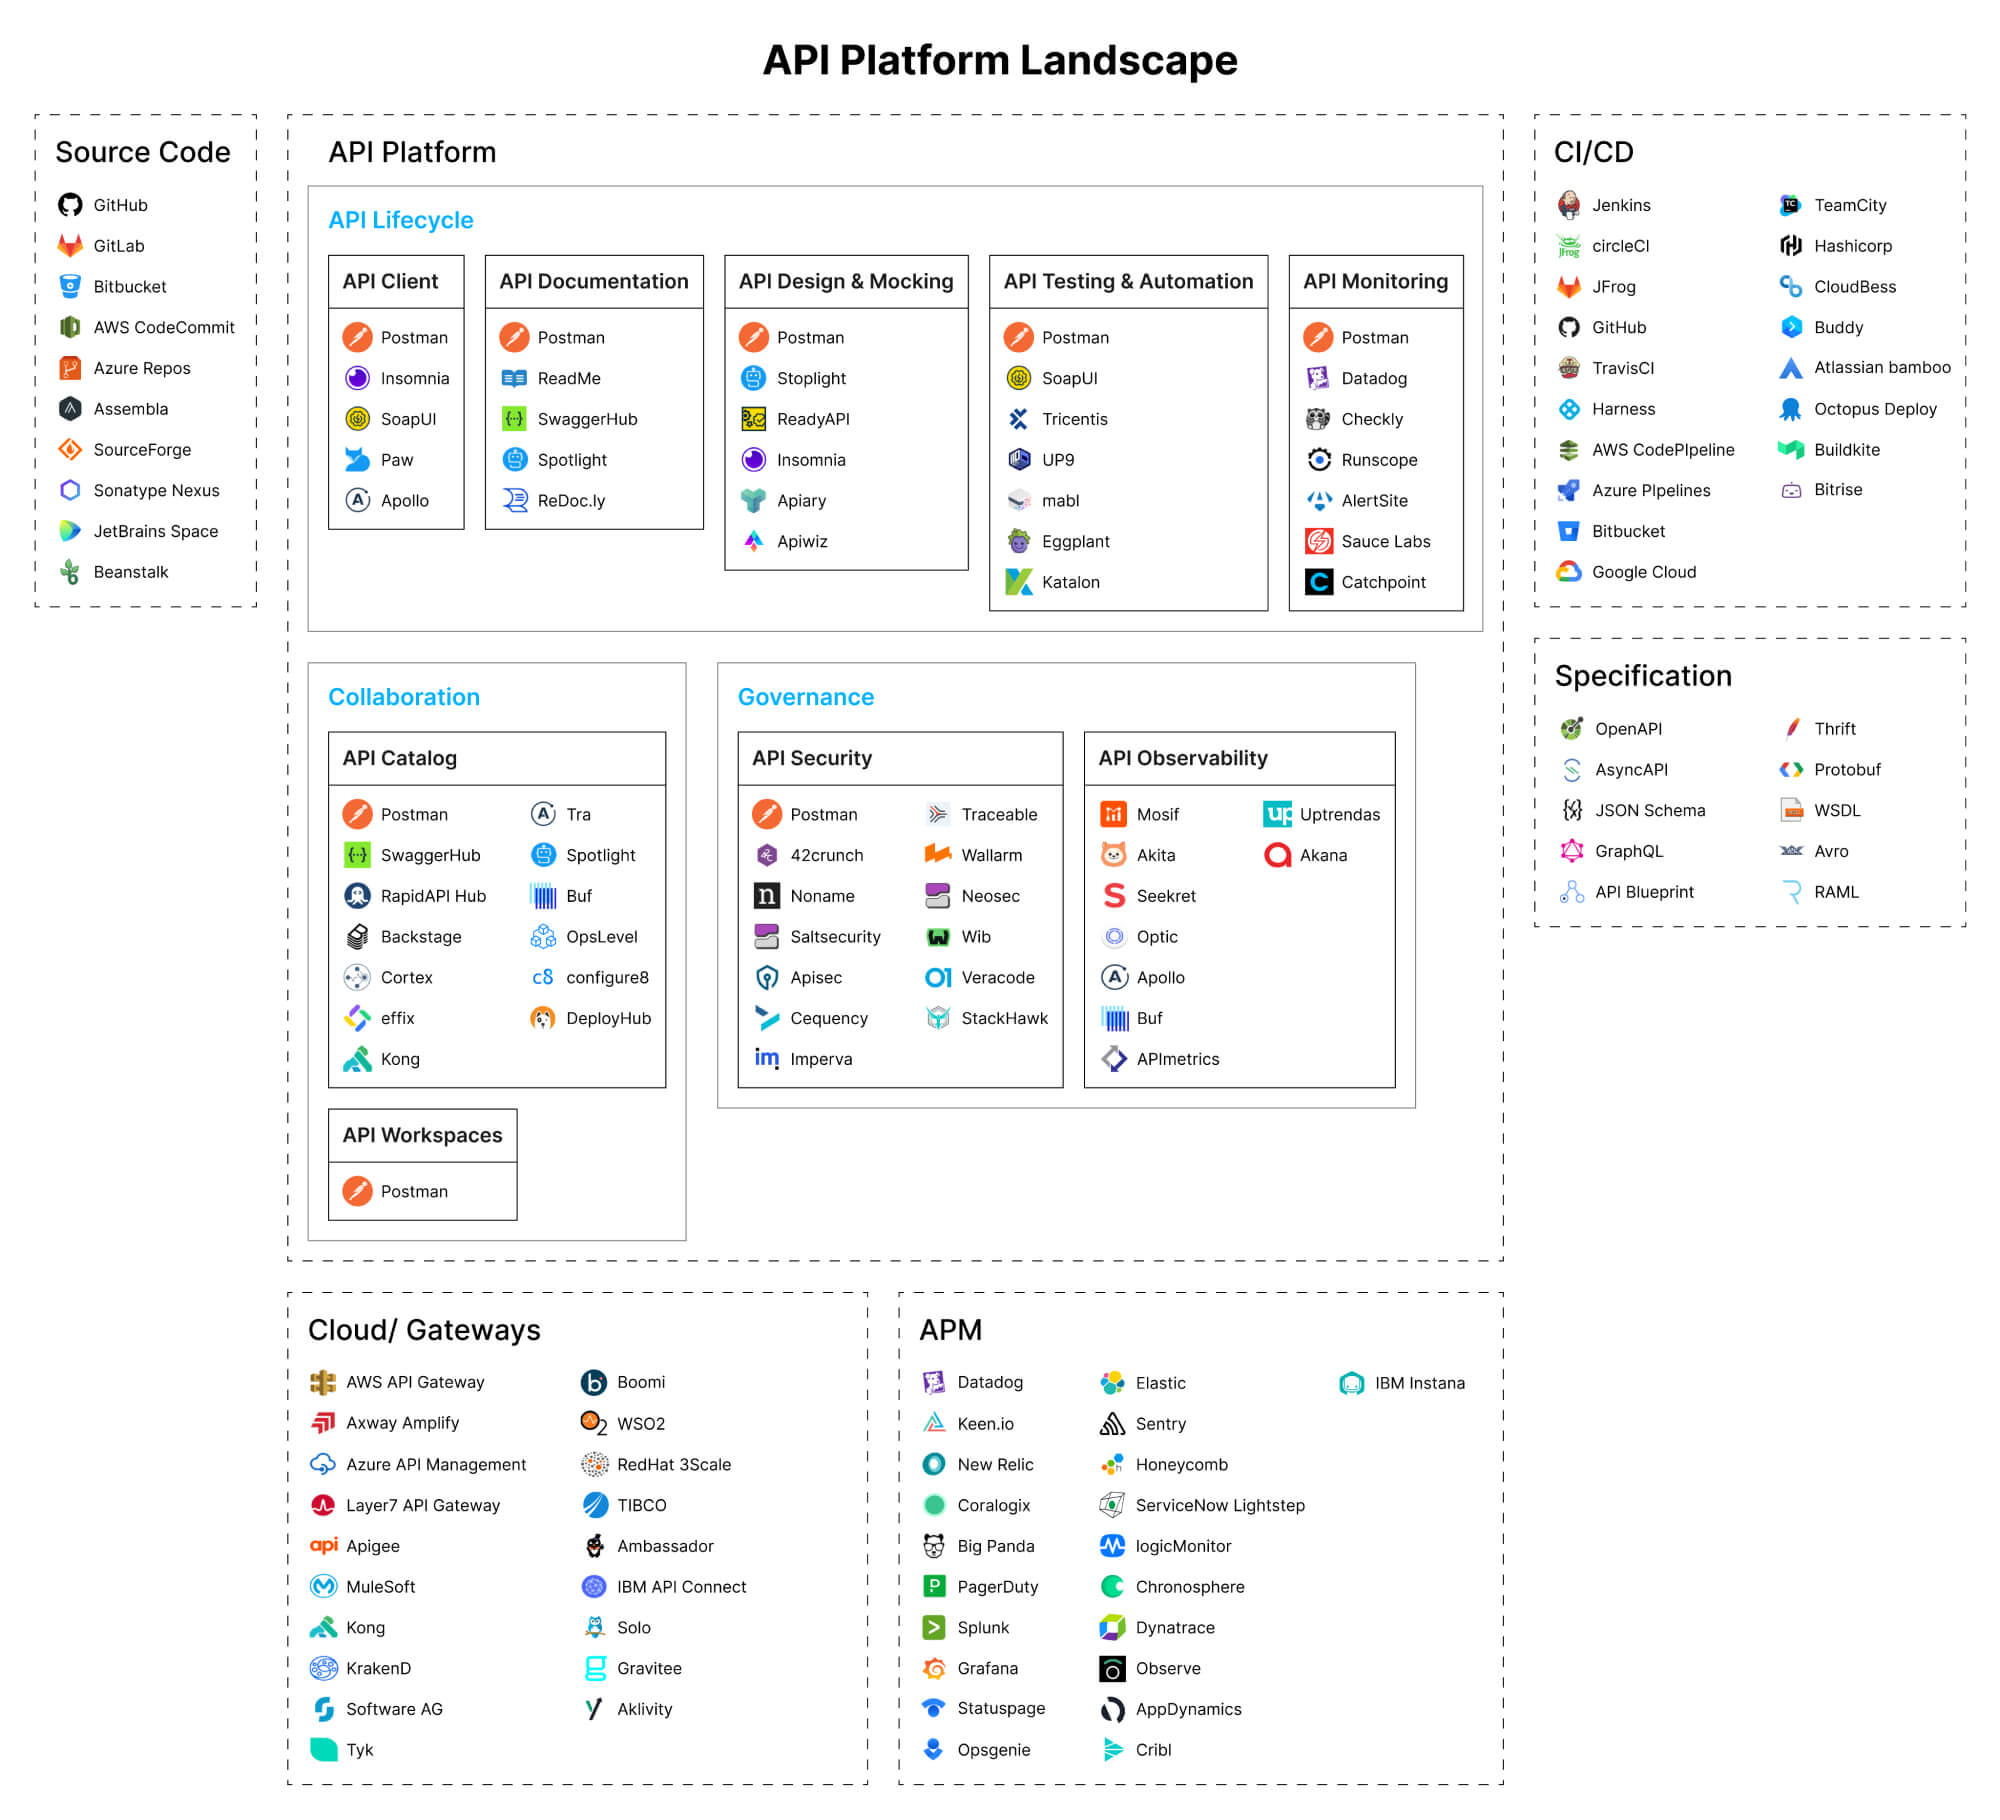 Challenges faced by organizations with the API platform Landscapes